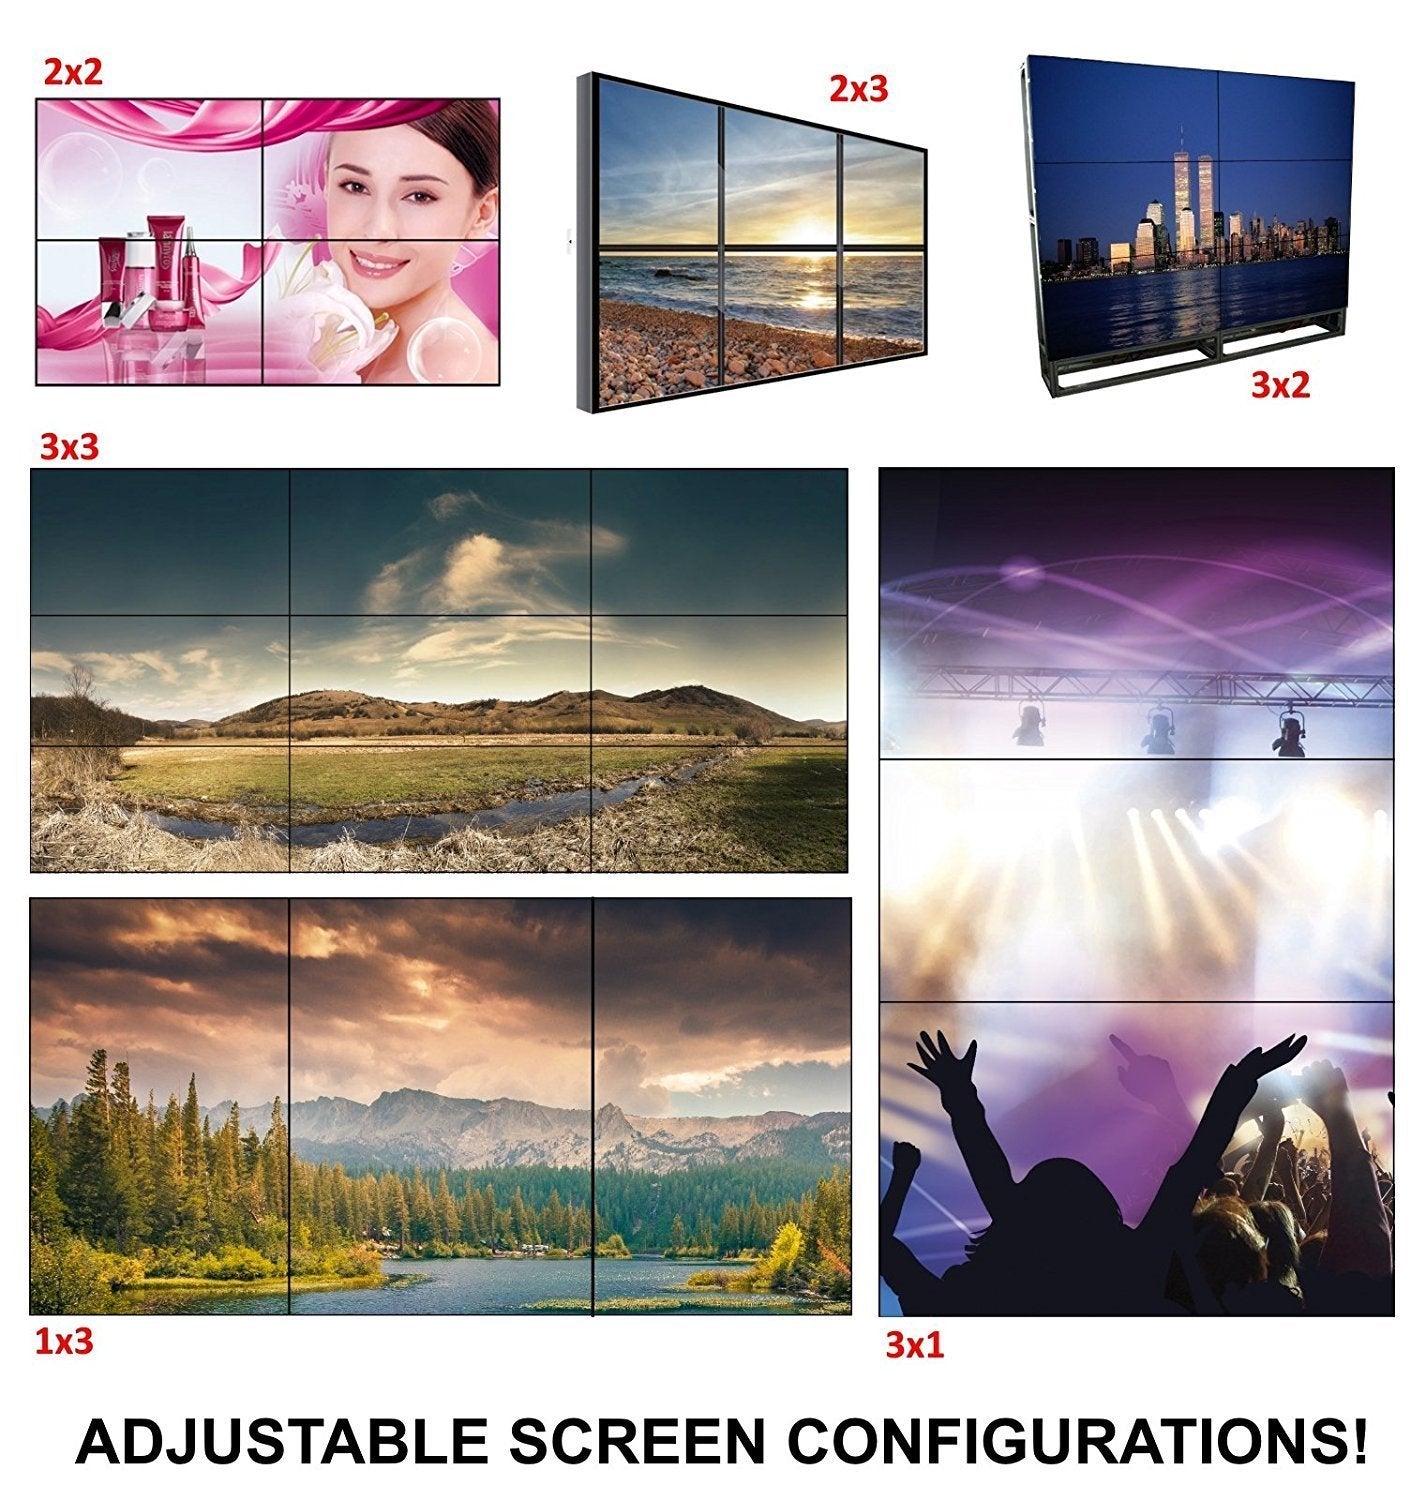 5 input 9 output - 3x3 Video Wall Processor for 9 Monitors - 4K60hz